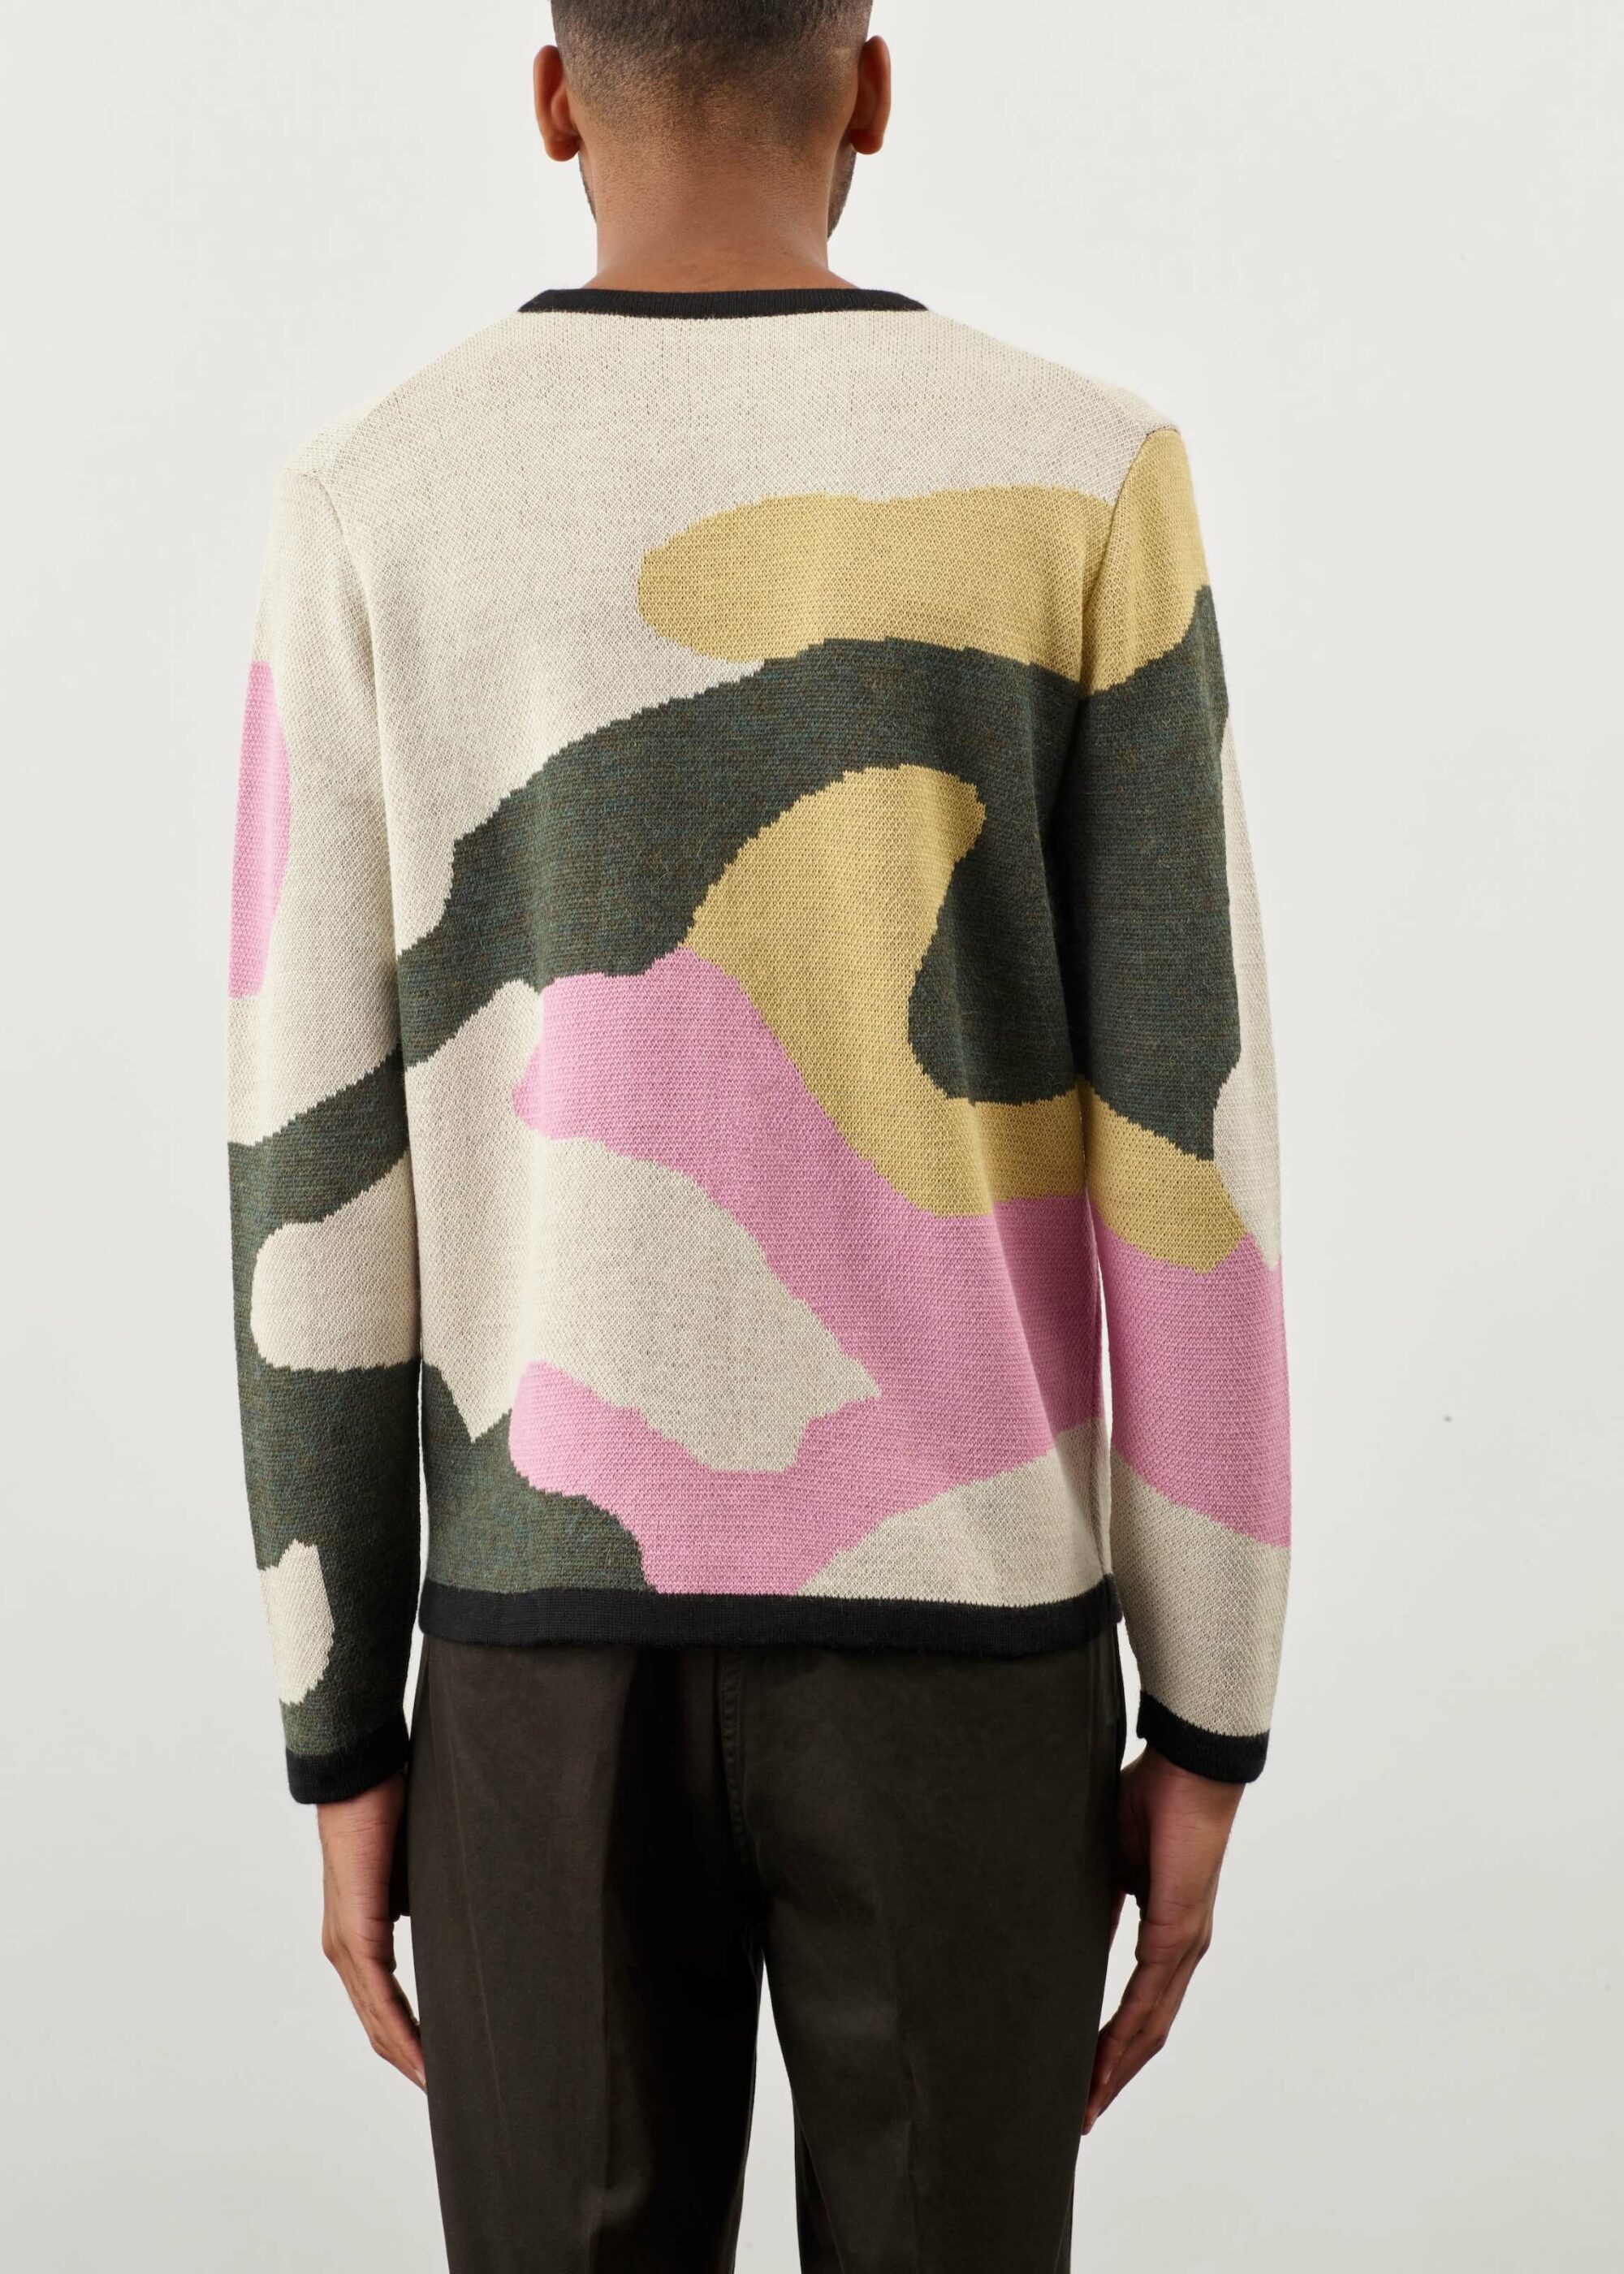 Product image for »Corbusier« Jacquard Sweater Baby Alpaca | Colour Mix